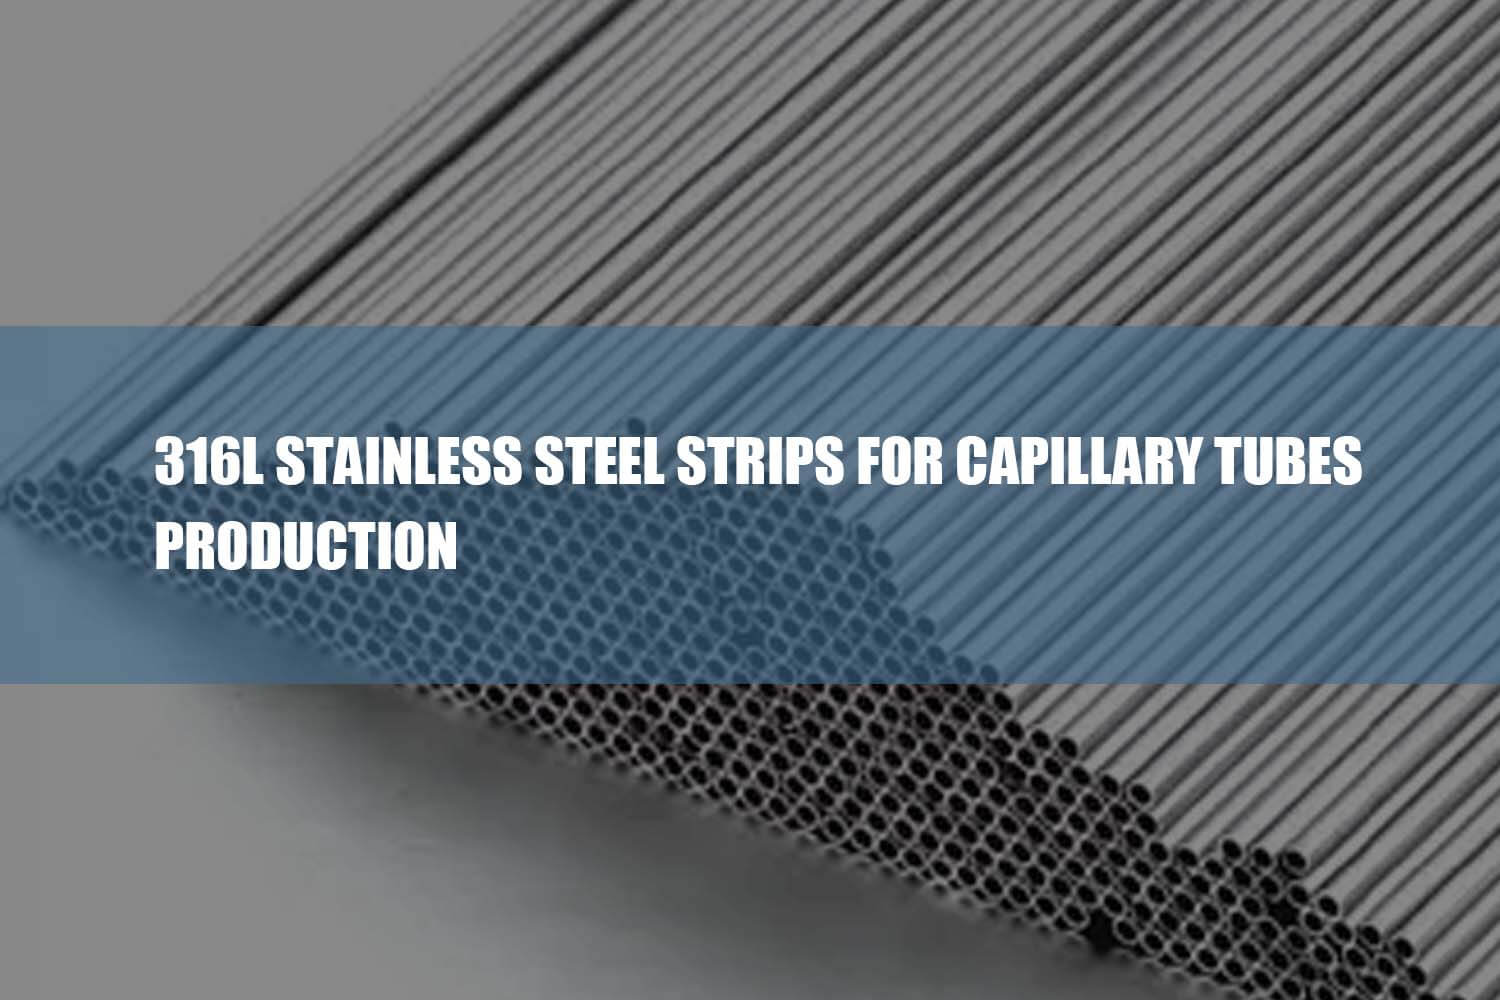 316l stainless steel strips for capillary tubes production